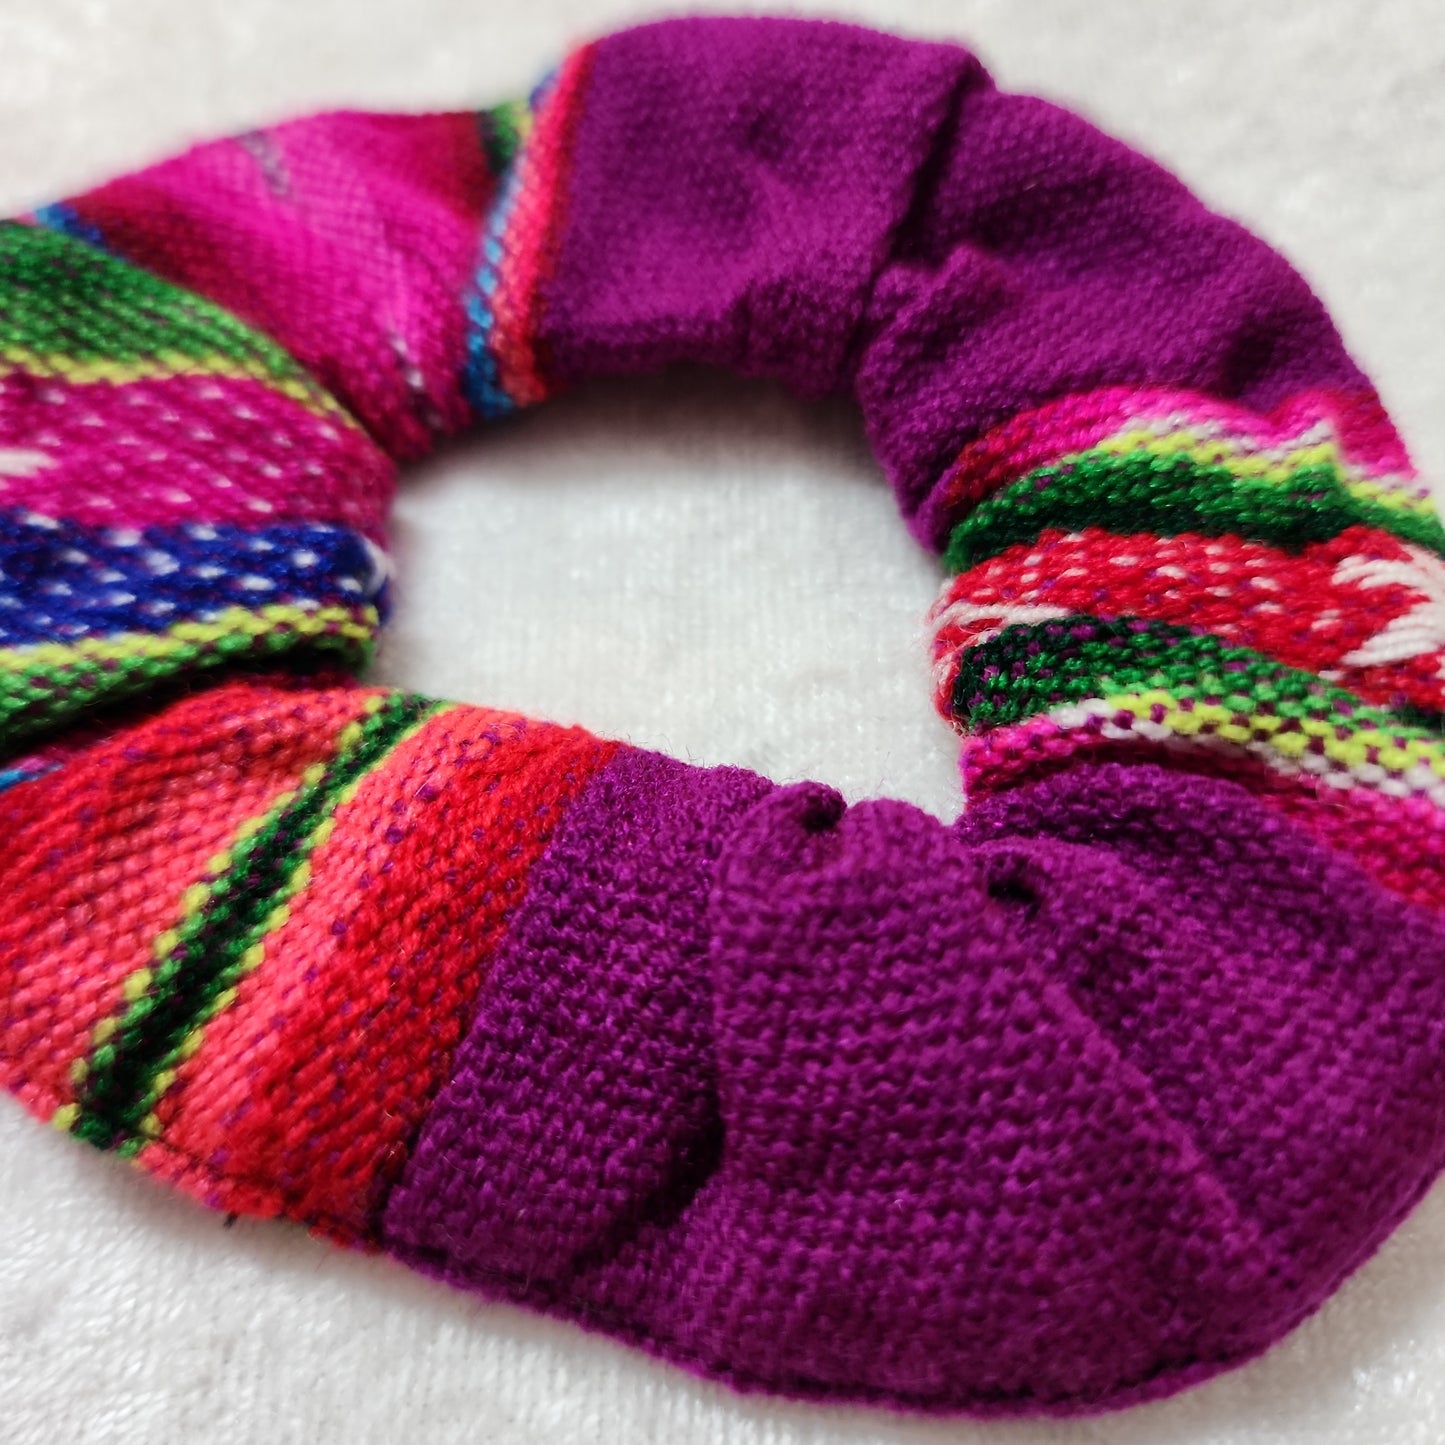 Andean aguayo wrist bands